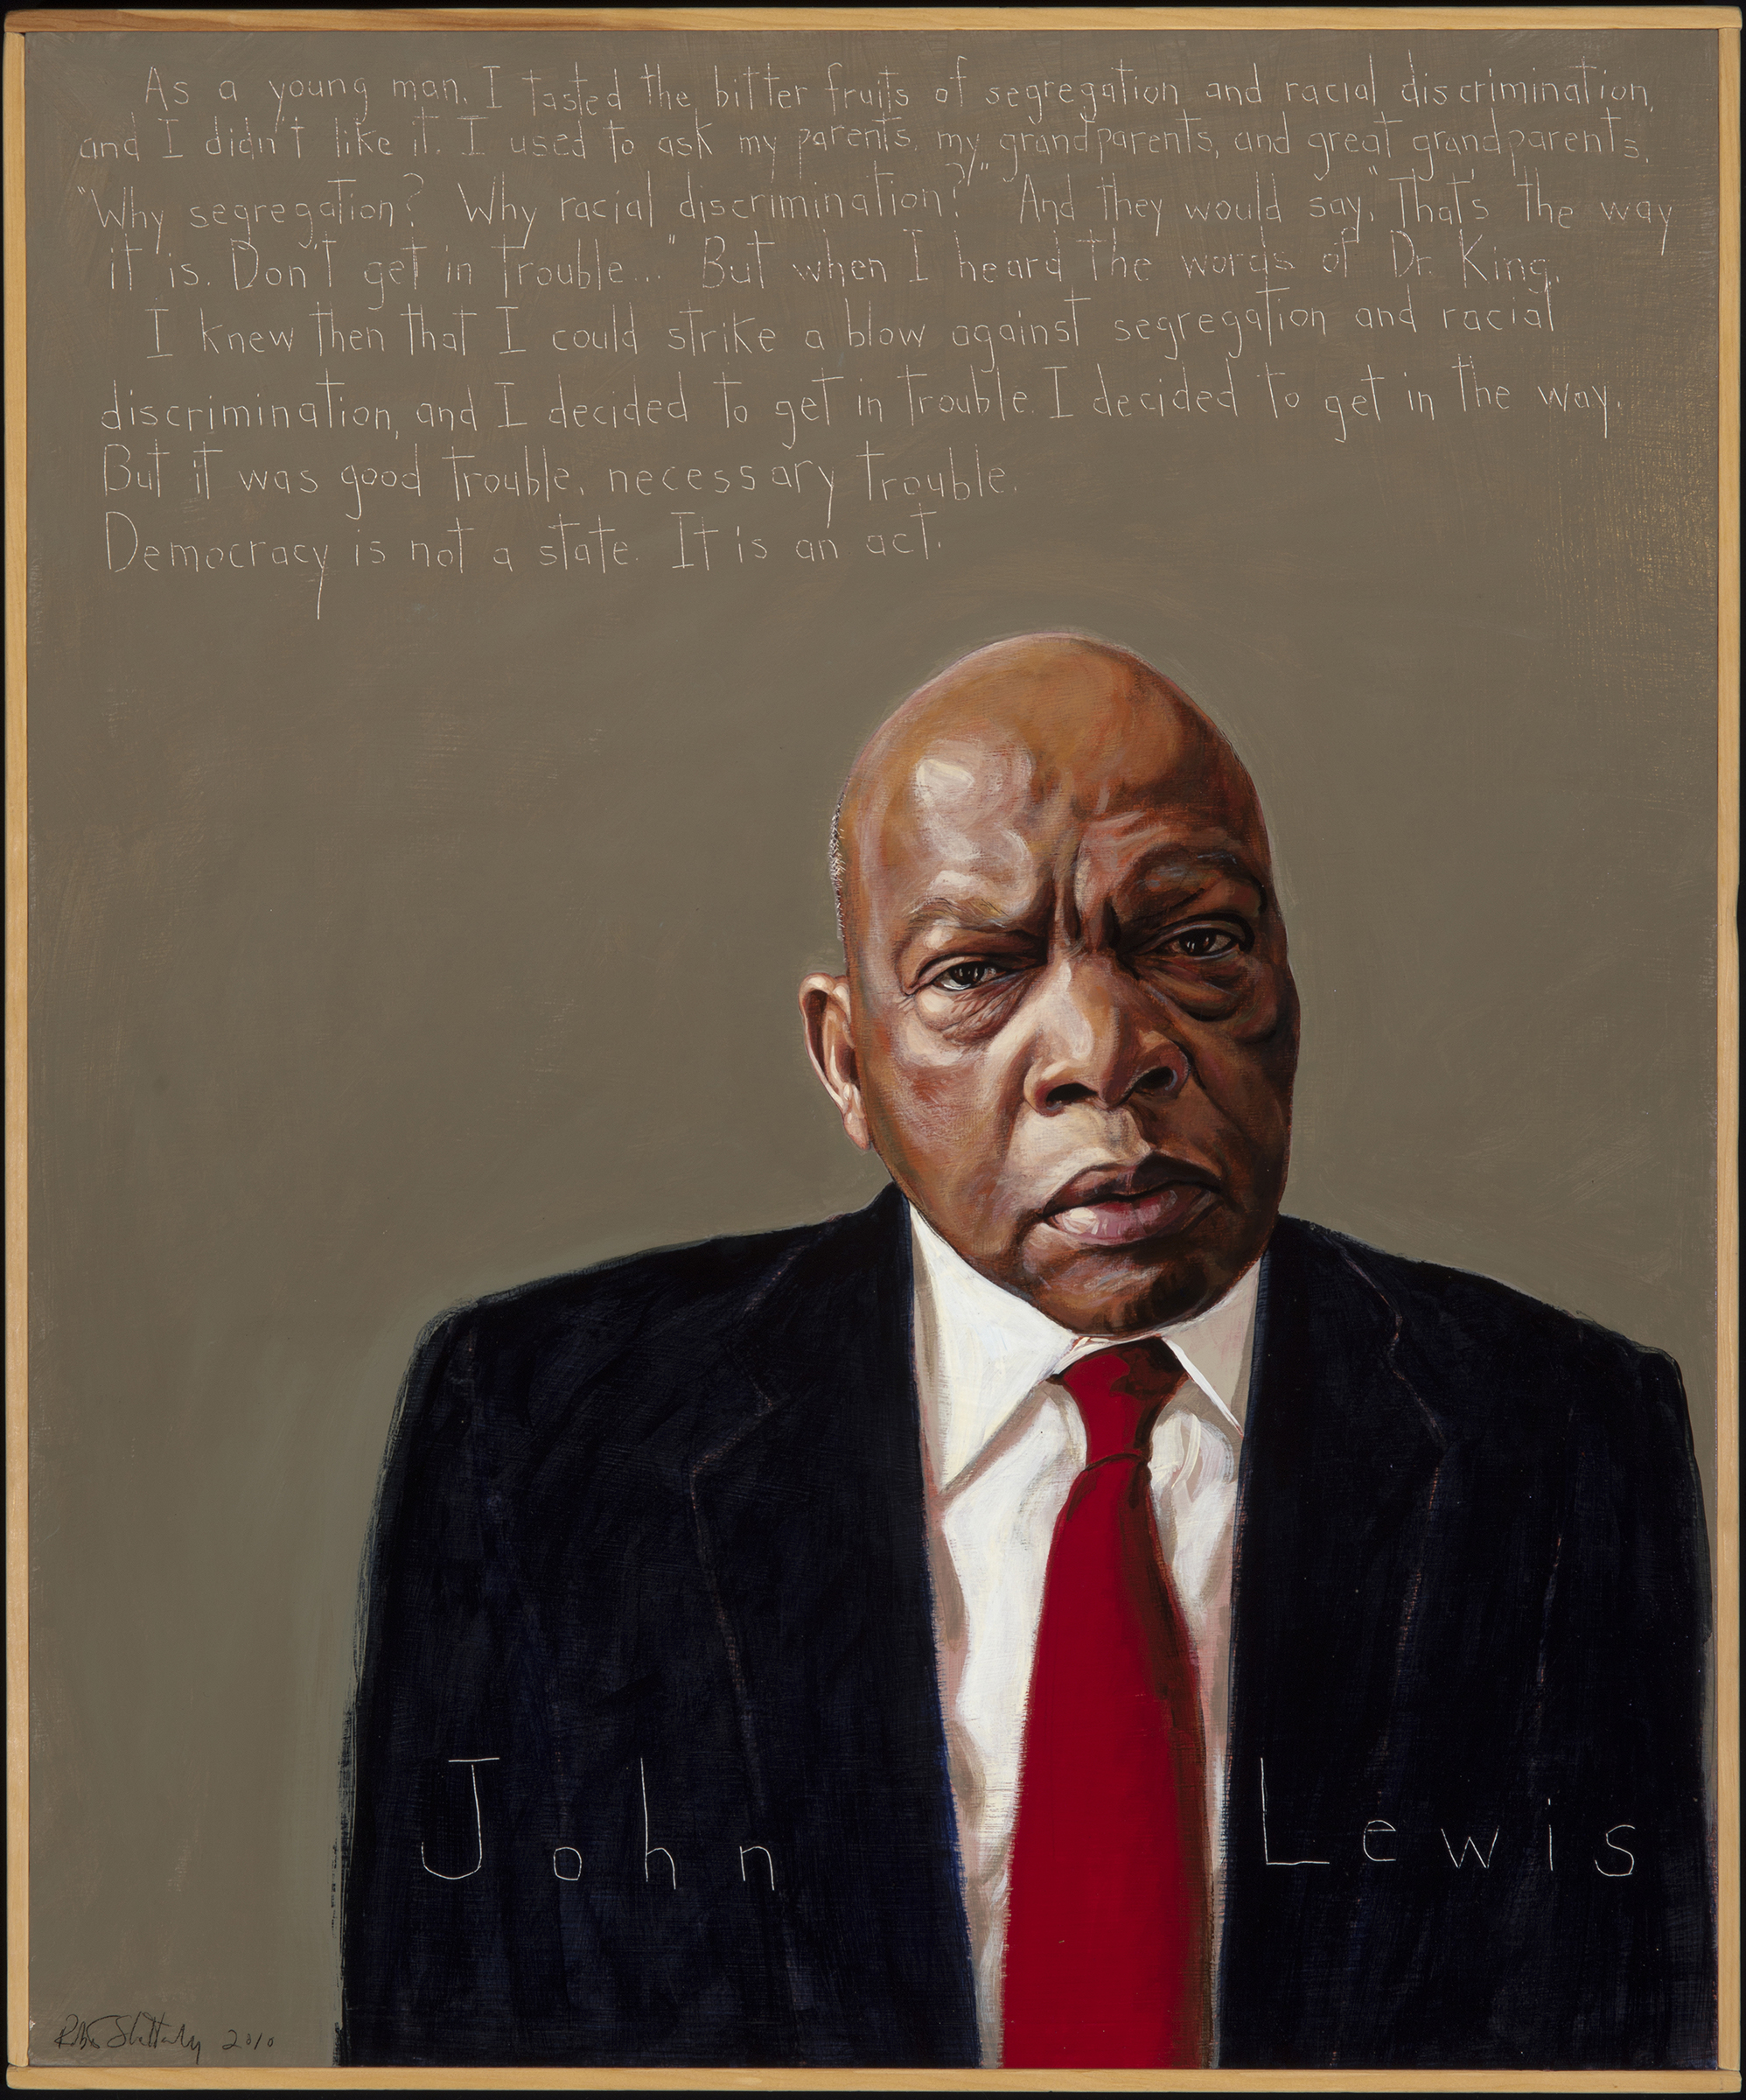 John Lewis, 2010. Portrait by Robert Shetterly. Courtesy of Americans Who Tell the Truth, www.americanswhotellthetruth.org.